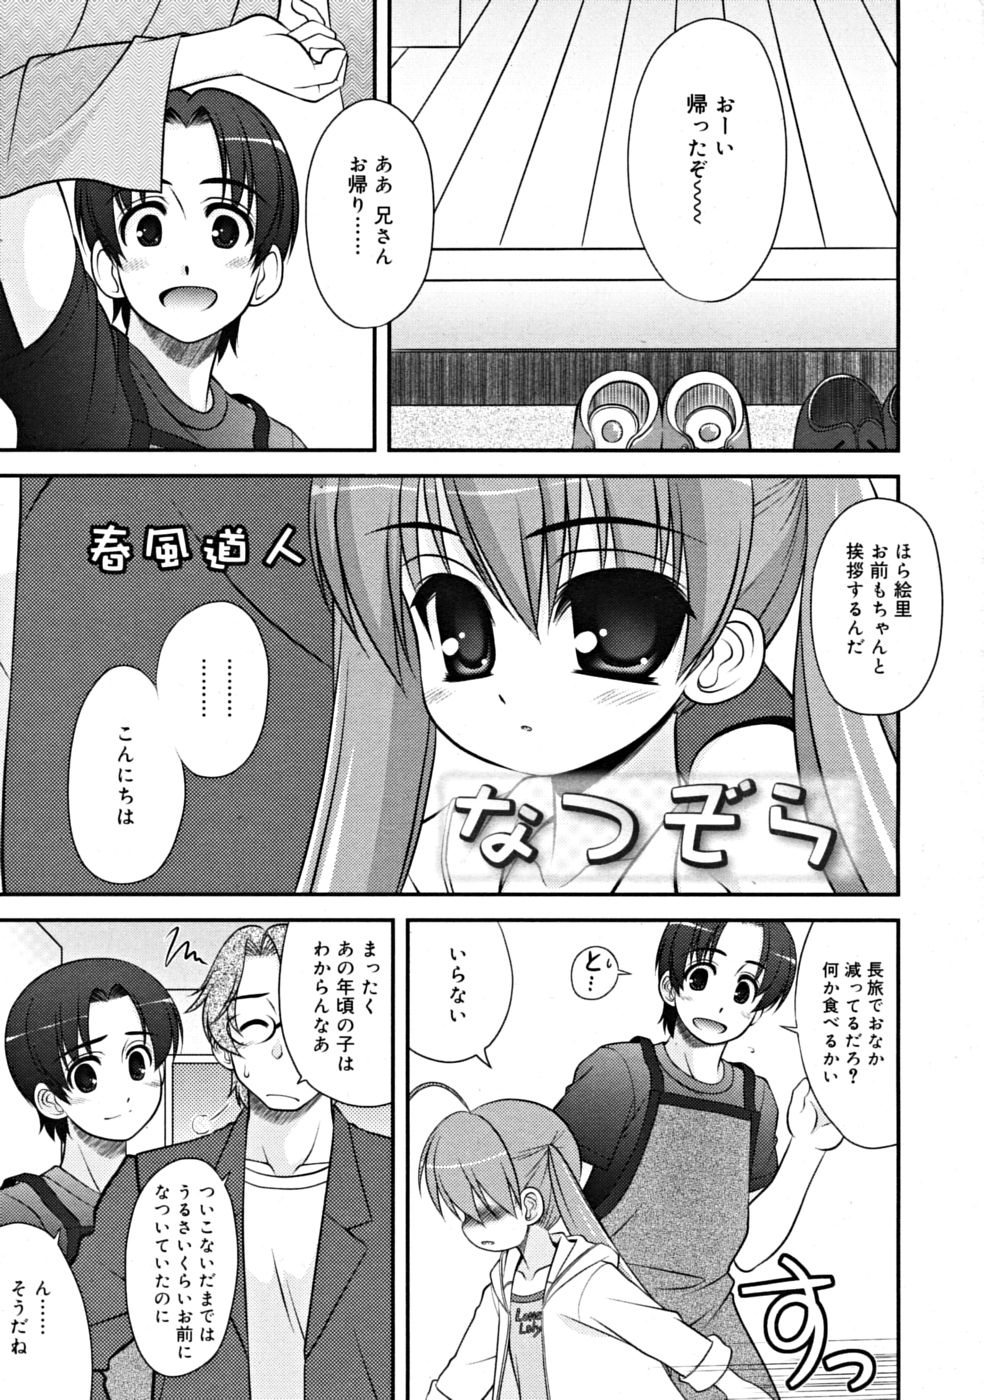 COMIC RiN 2008-09 page 23 full